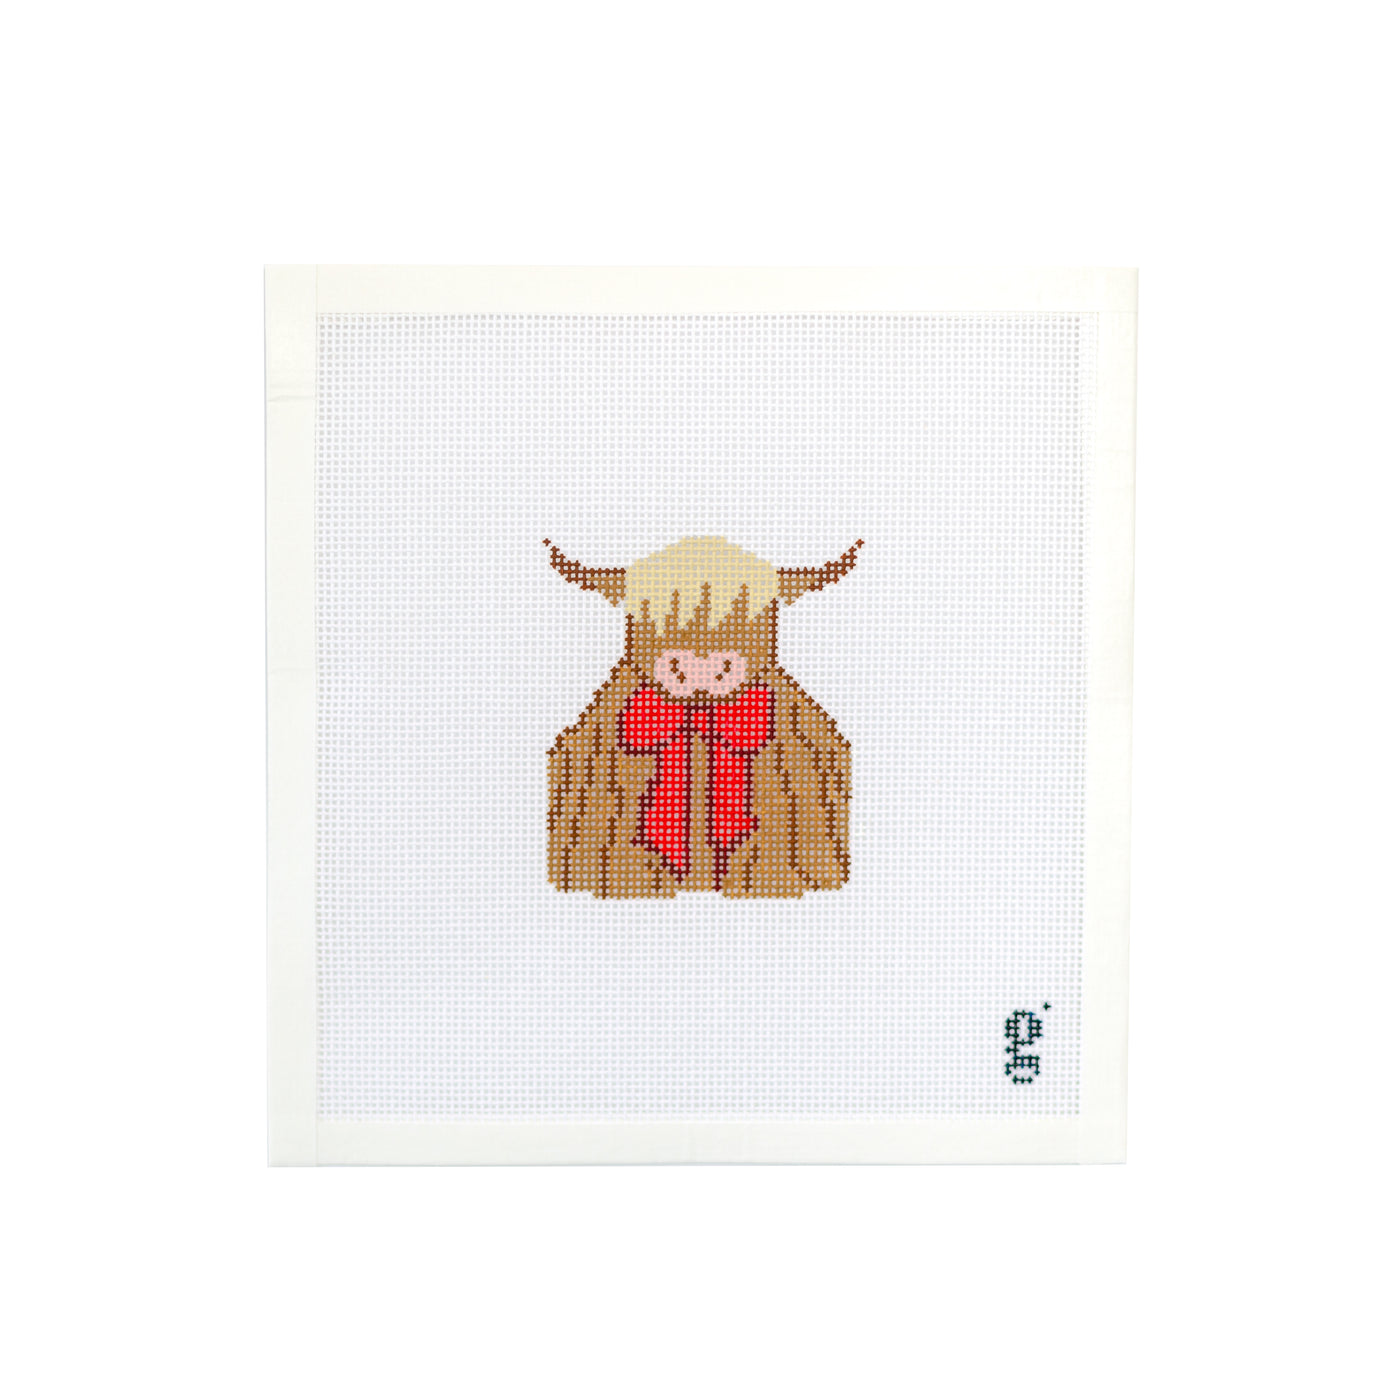 Square white needlepoint canvas with brown highland cow wearing red bow